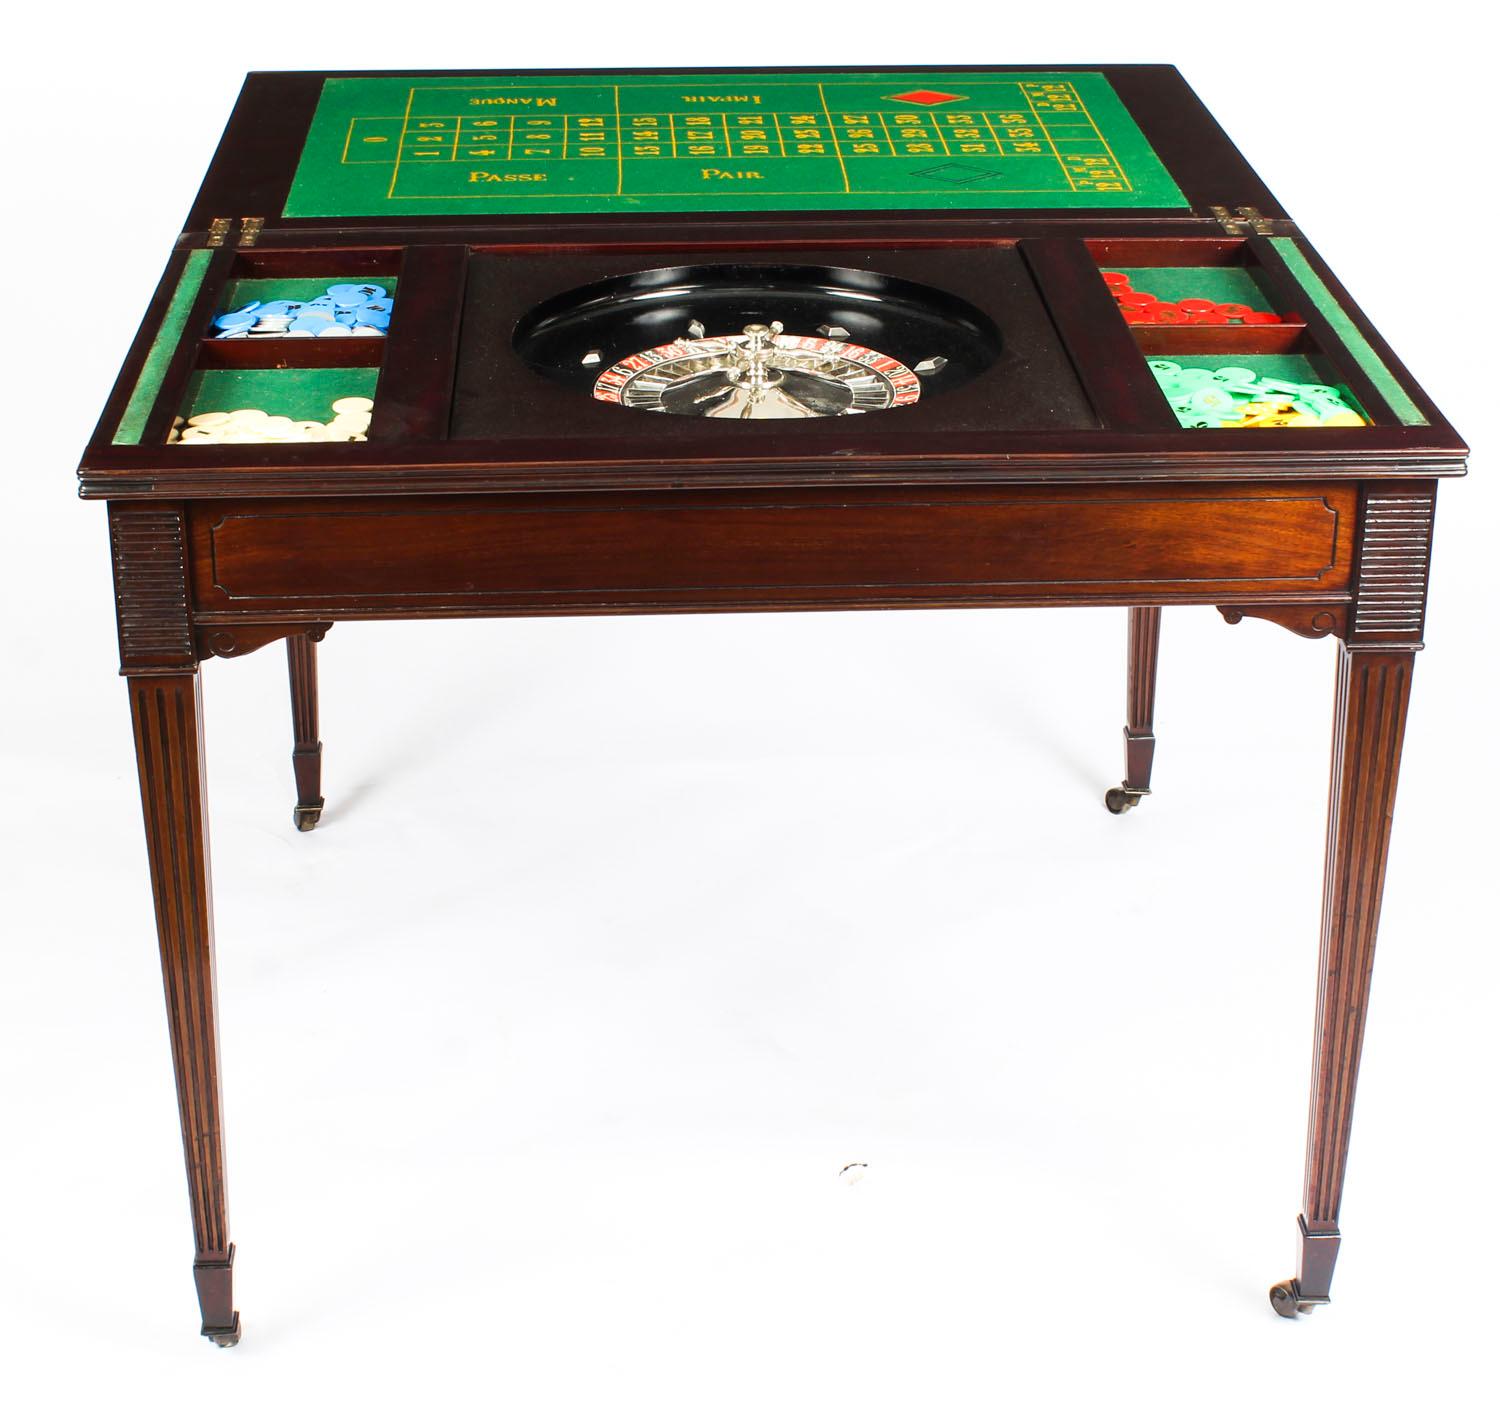 English Antique Victorian Mahogany Games Card Roulette Table, 19th Century